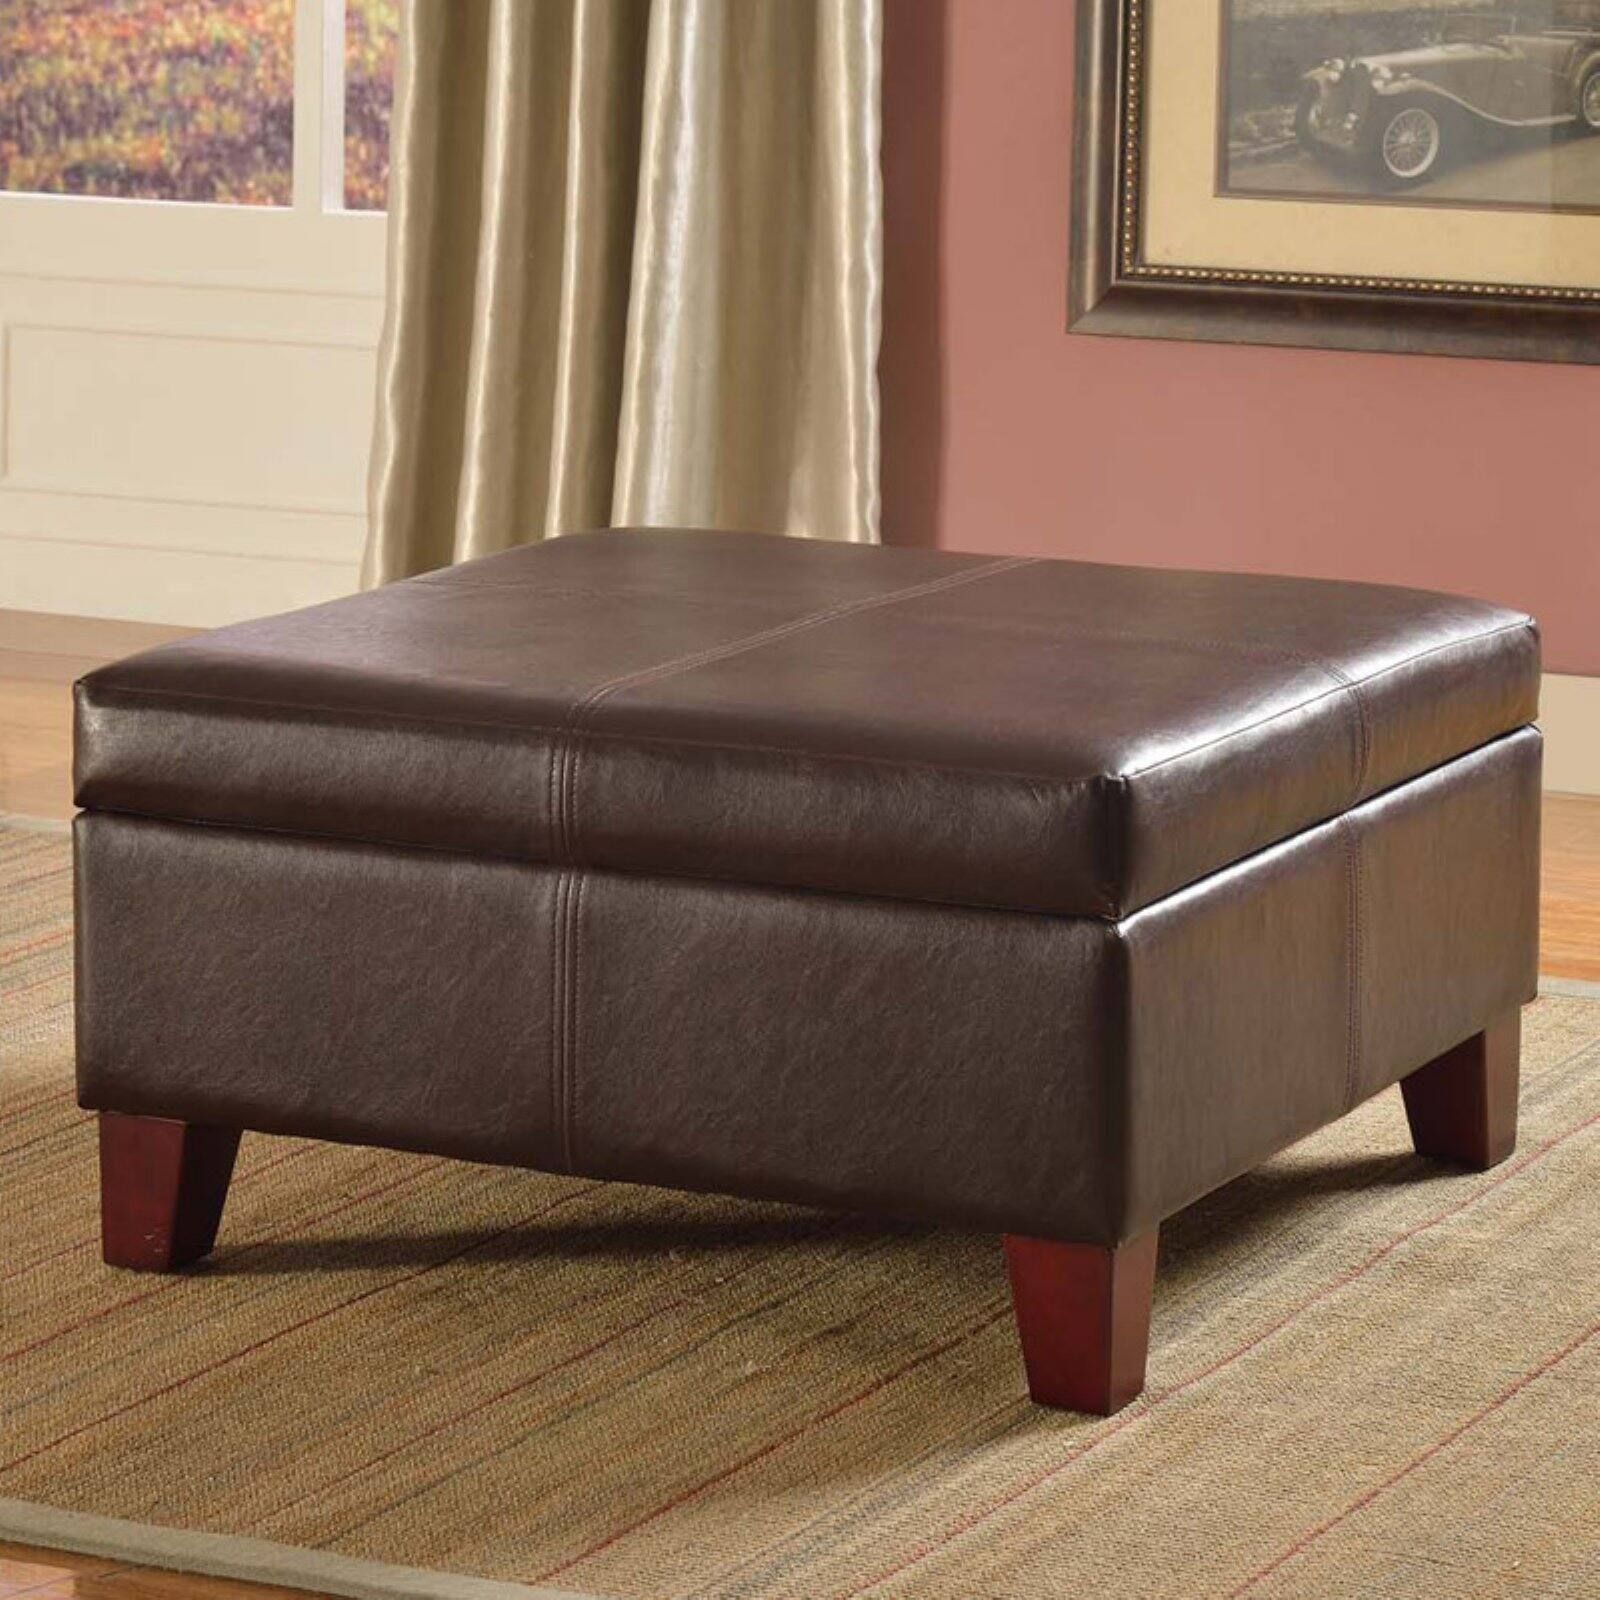 Kinfine Usa Luxury Large Faux Leather Storage Ottoman – Walmart In Fabric Oversized Pouf Ottomans (View 1 of 20)